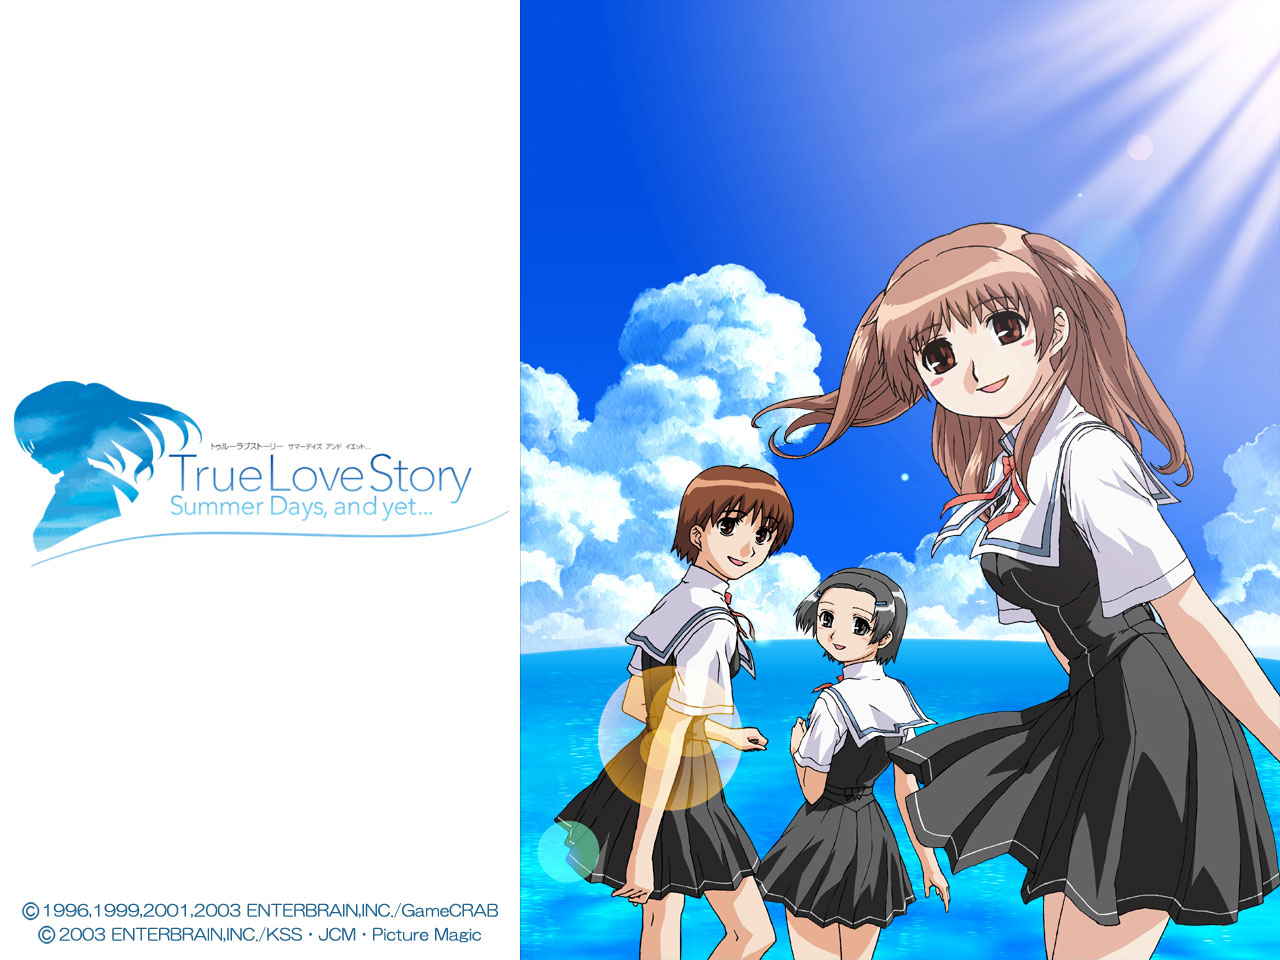 Download full size The Love Story wallpaper / Anime / 1280x960